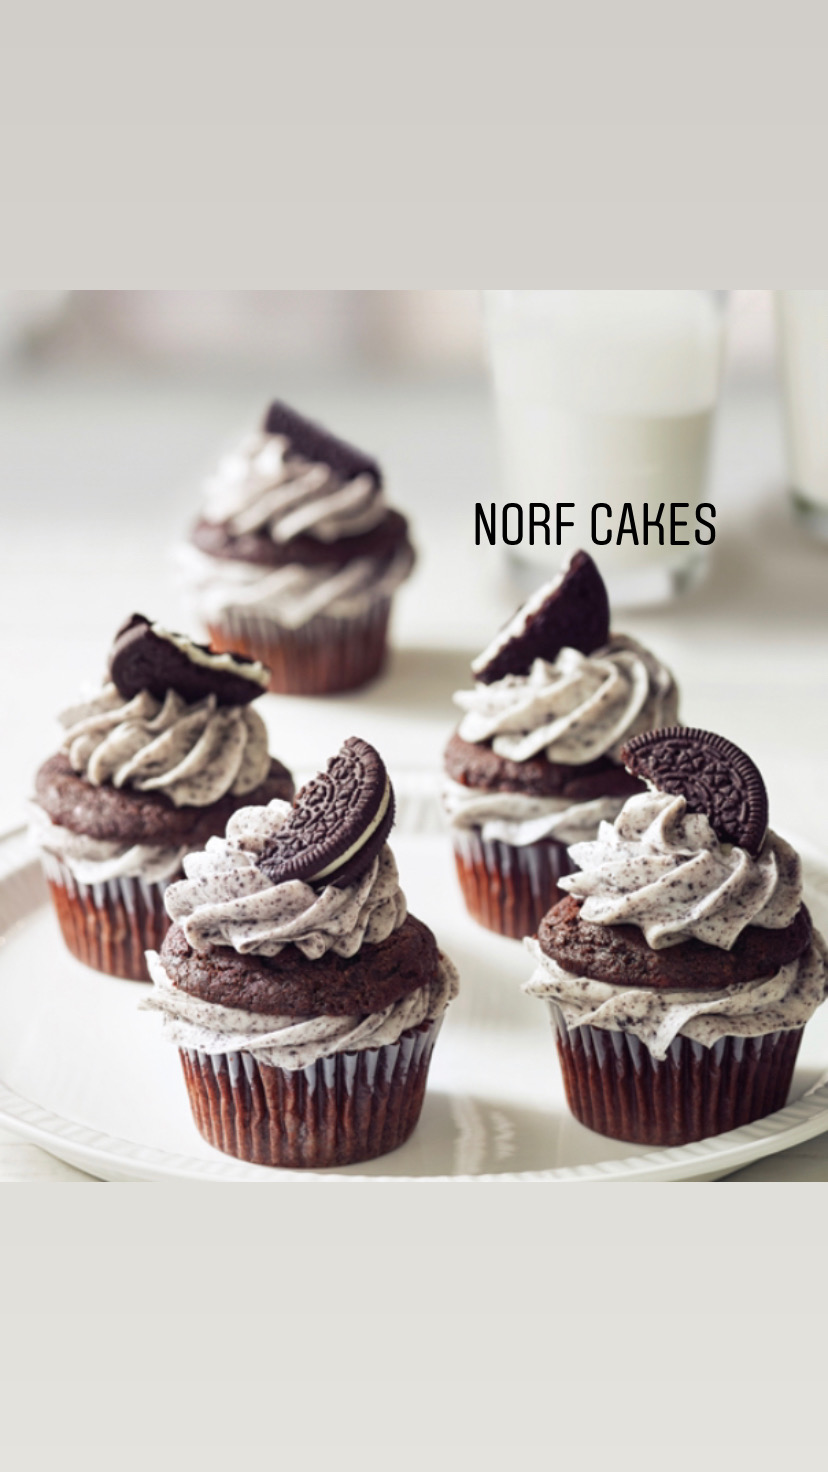 Norf cakes